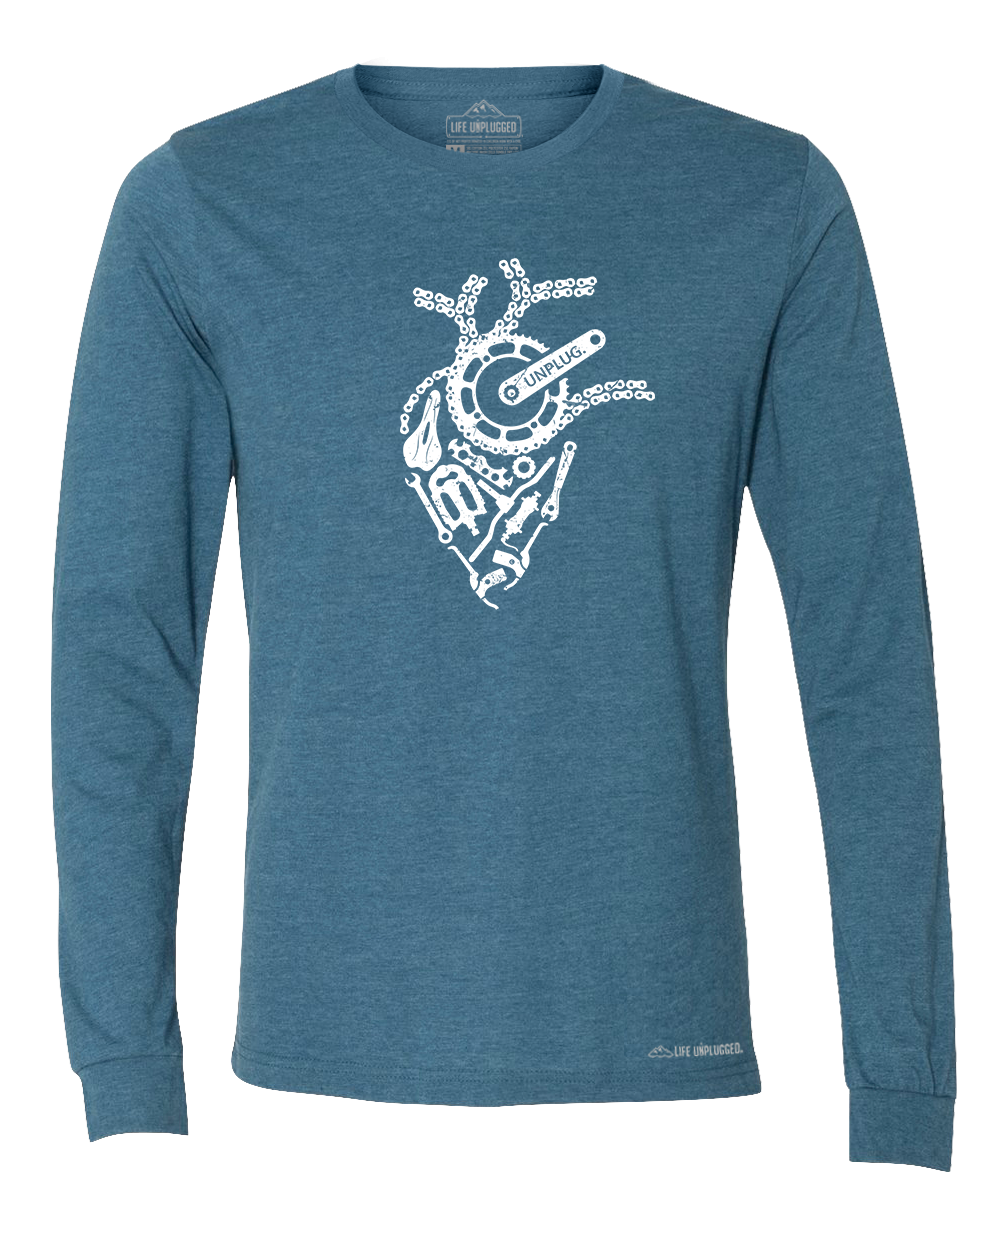 Anatomical Heart (Bicycle Parts) Premium Polyblend Long Sleeve T-Shirt